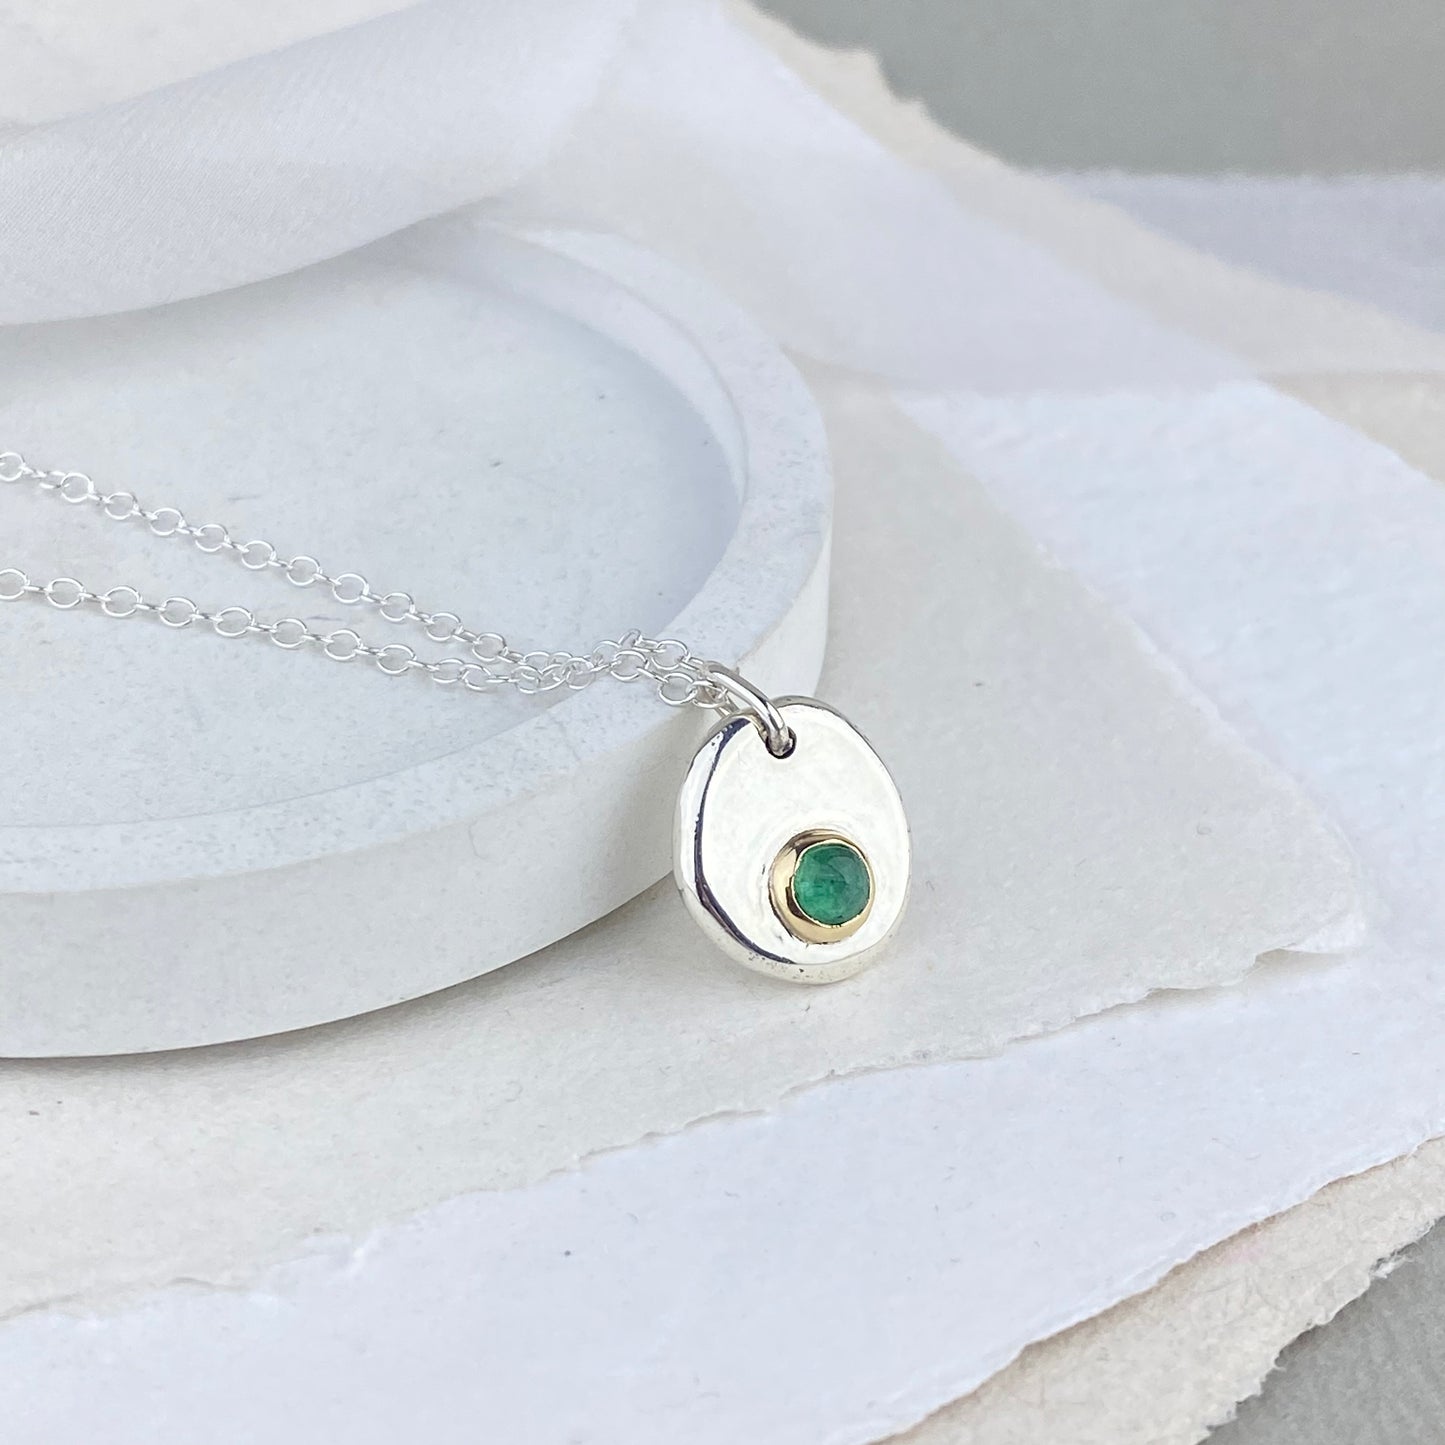 Emerald pendant in silver and 9ct gold